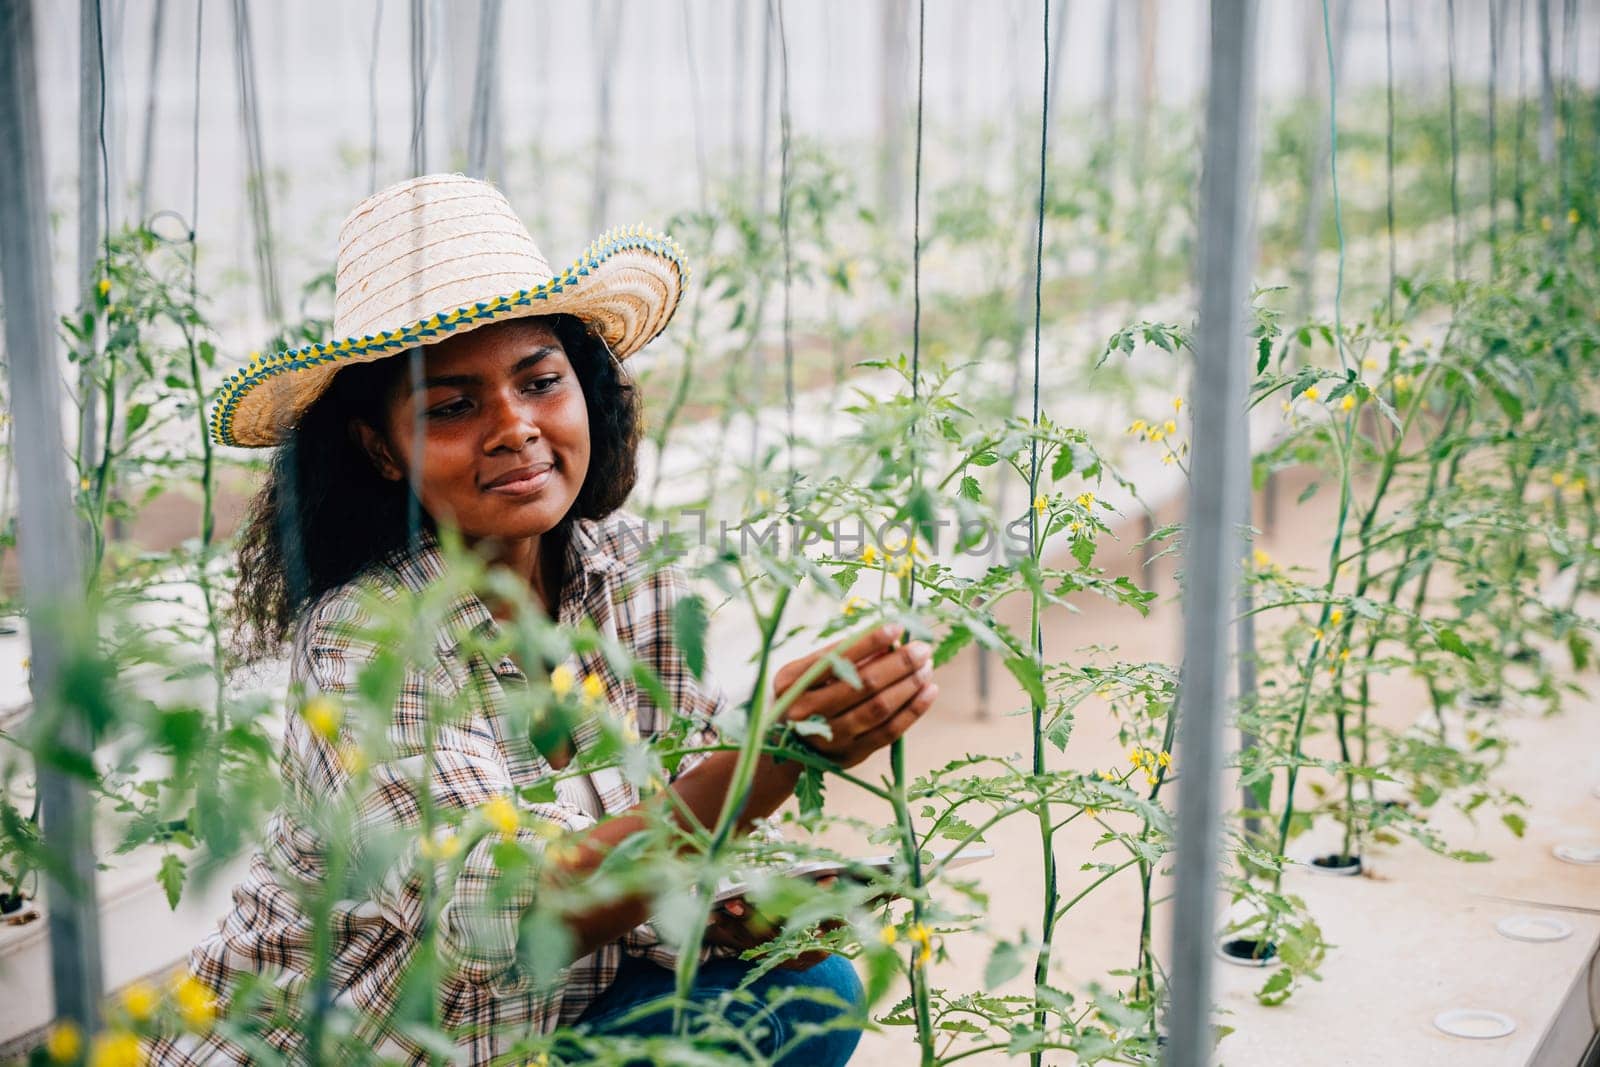 Black woman agronomist joyfully inspects and controls tomato quality in a farm greenhouse by Sorapop